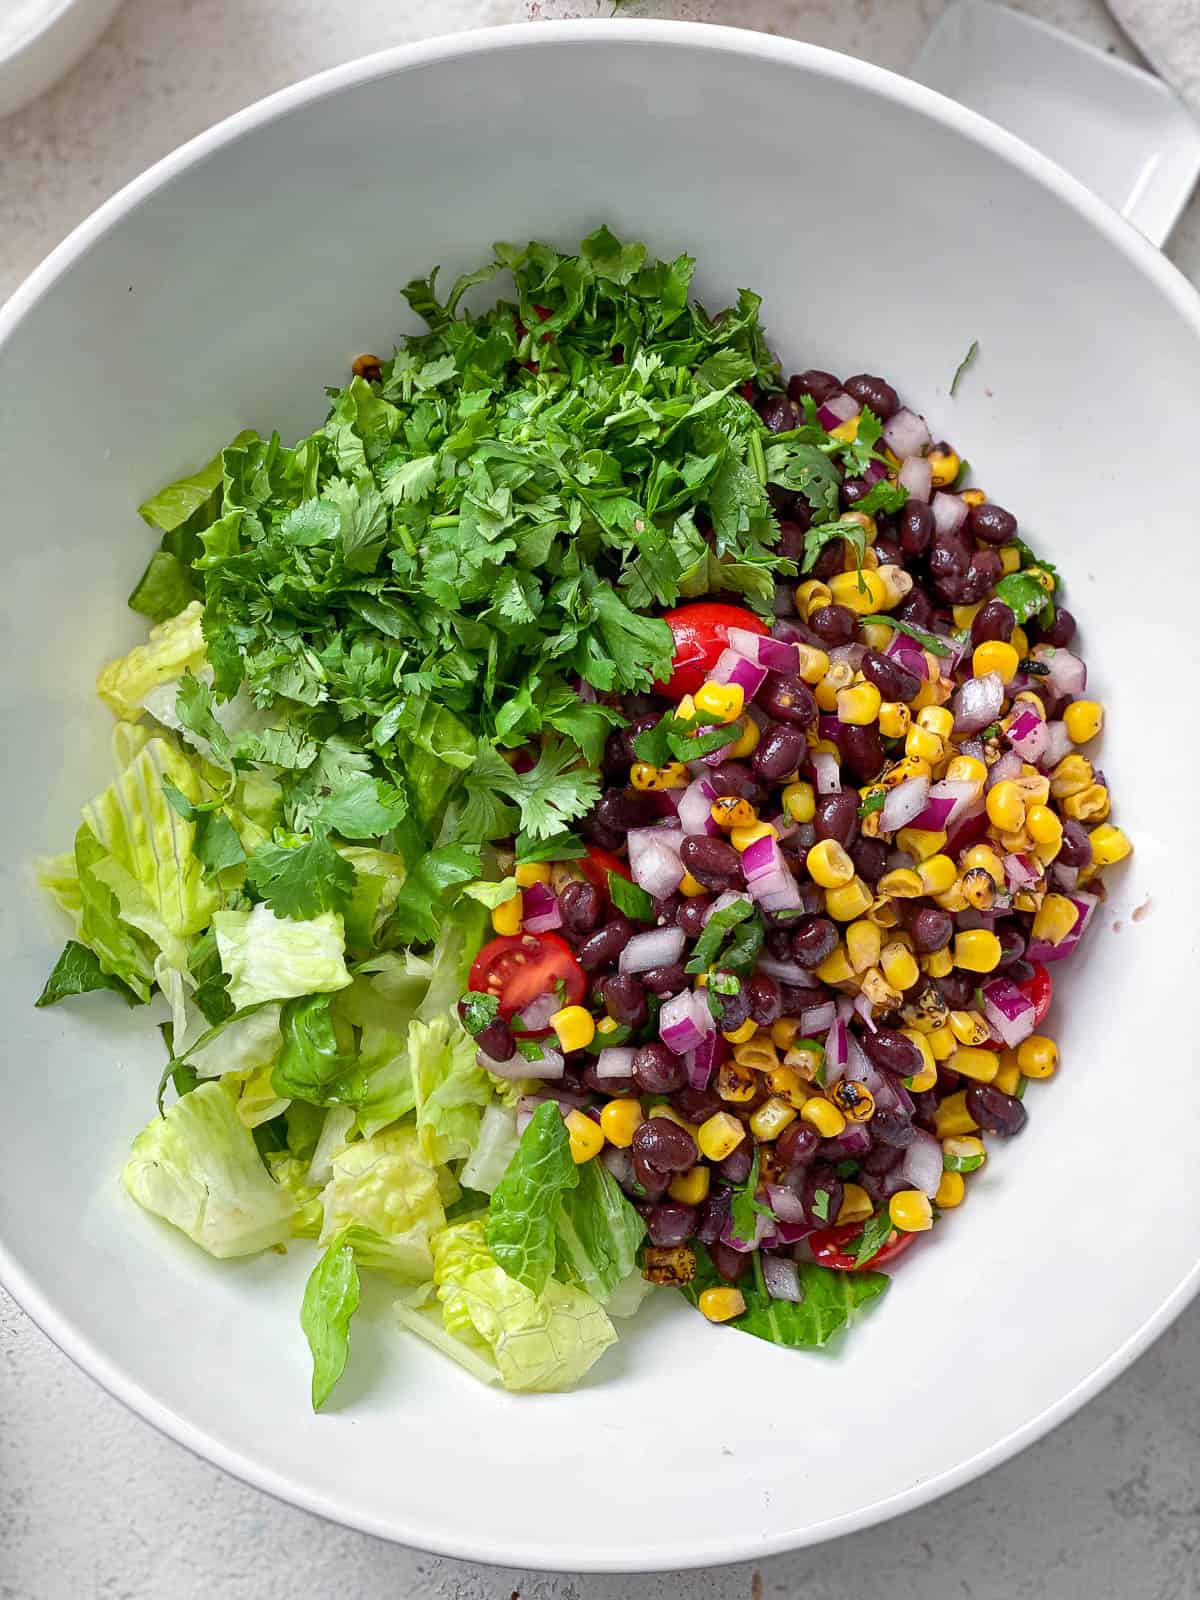 Large white bowl of chopped romaine lettuce, roasted corn, chopped cilantro, black beans, halved cherry tomatoes, and diced onions.